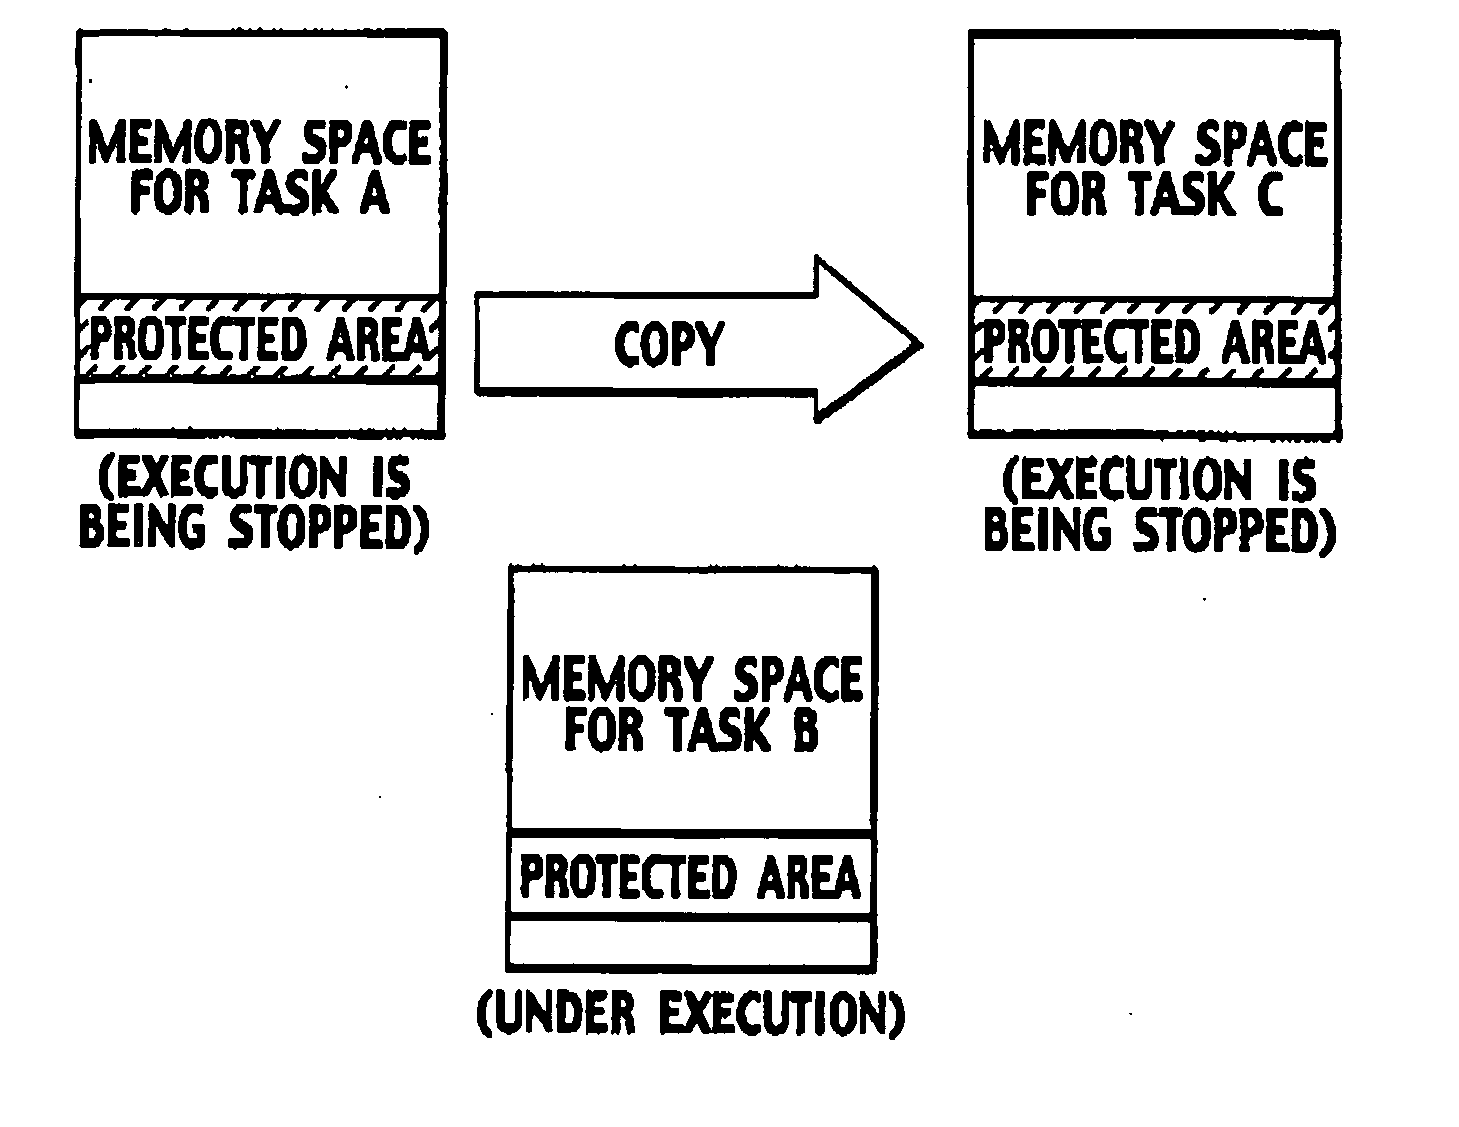 Multitask execution system